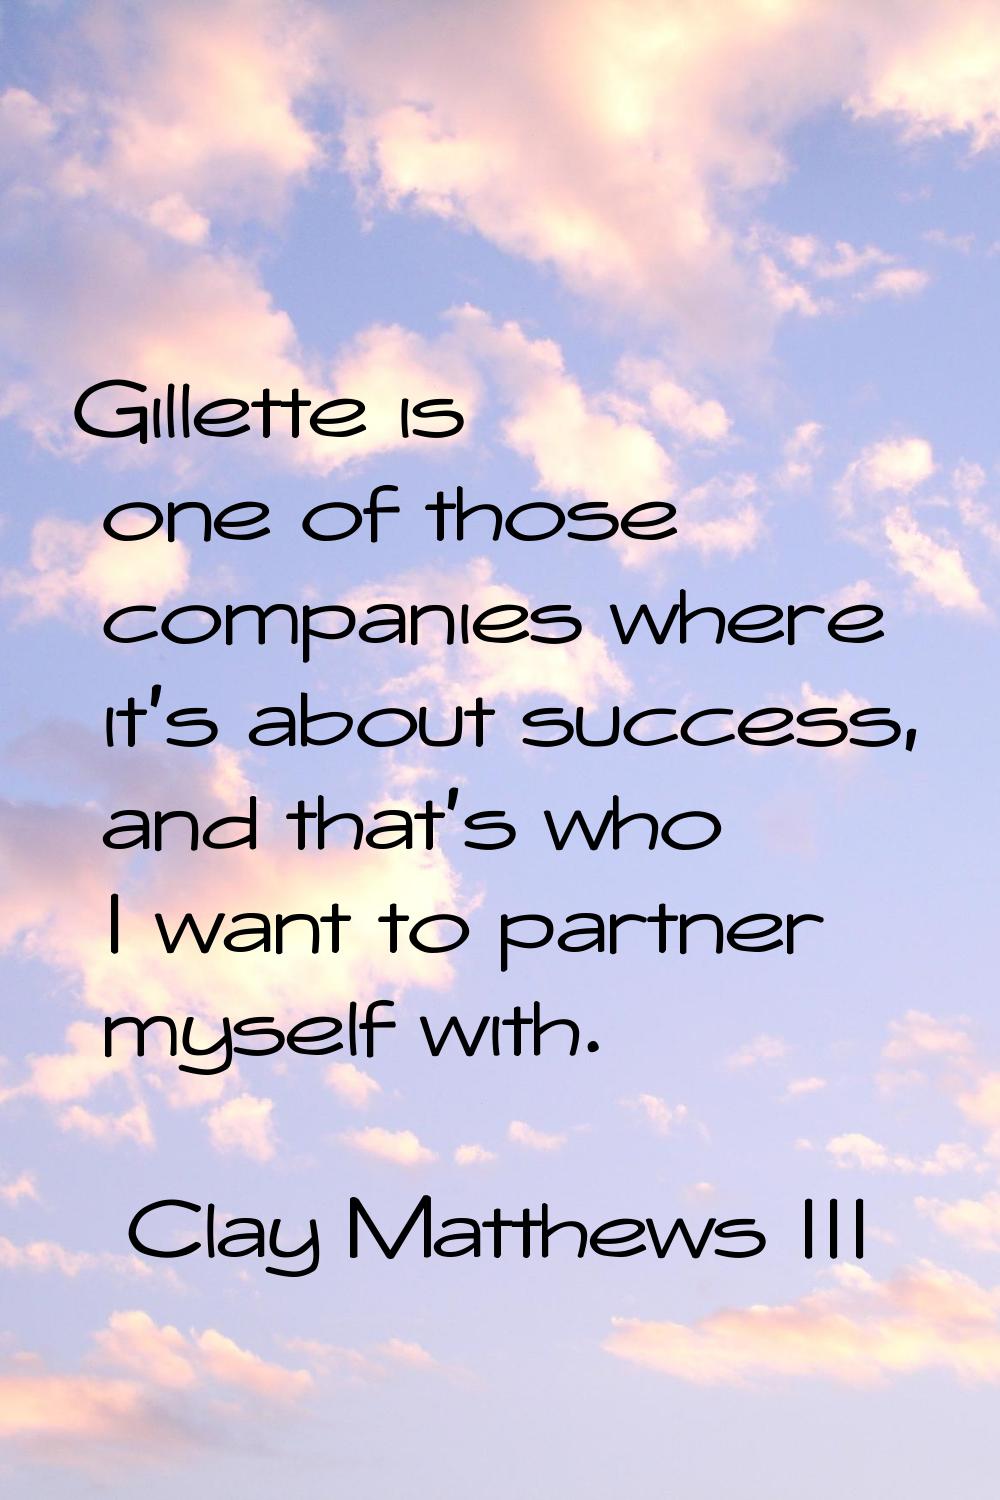 Gillette is one of those companies where it's about success, and that's who I want to partner mysel